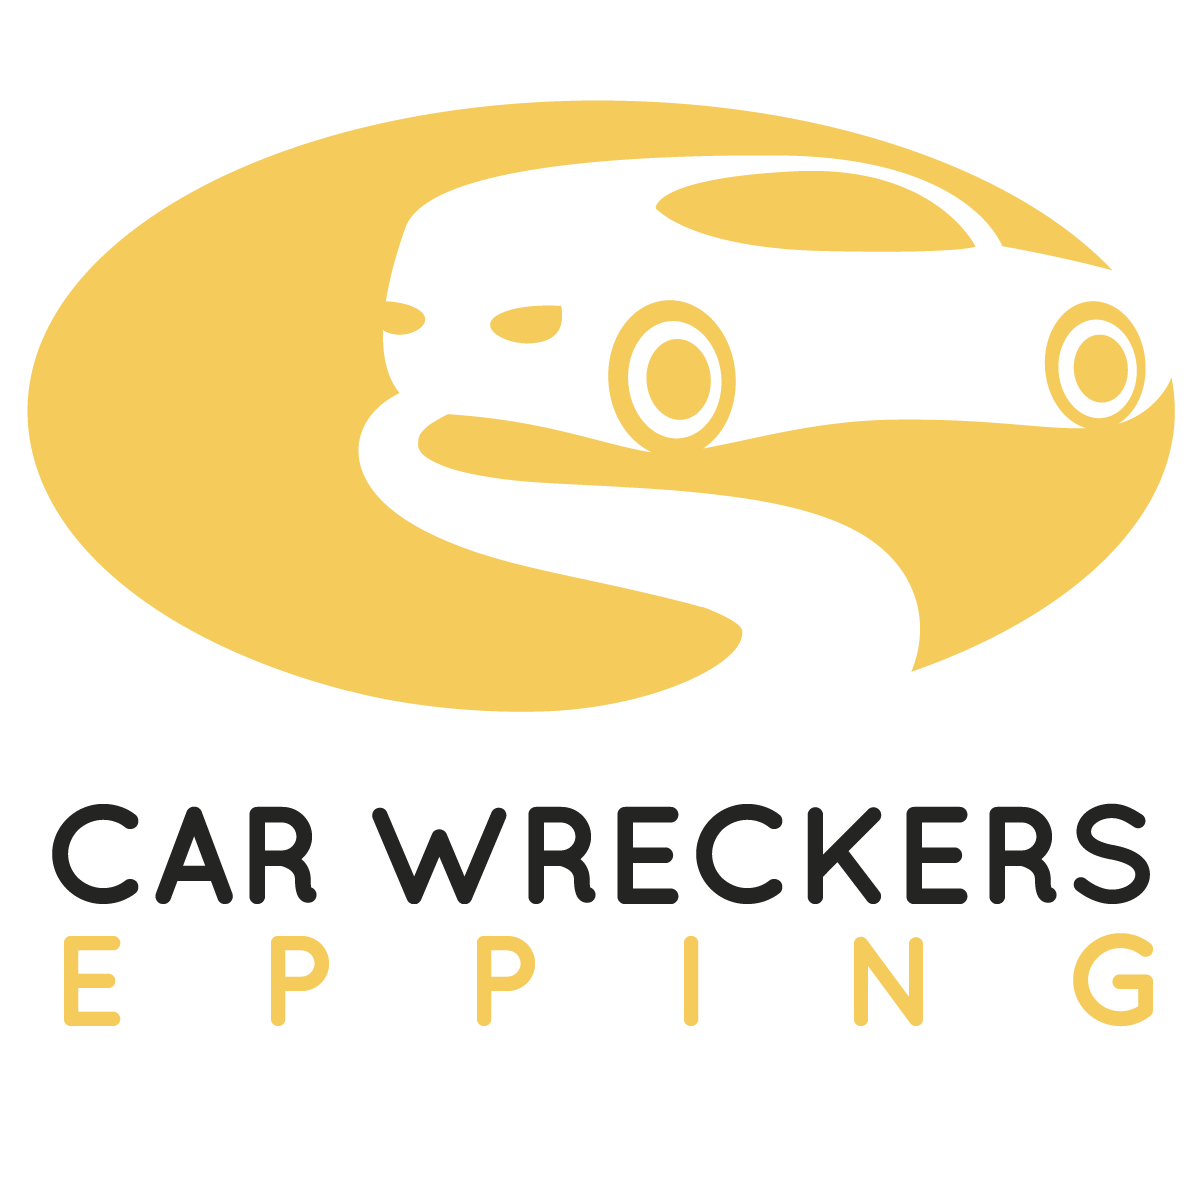 Car Wreckers Epping